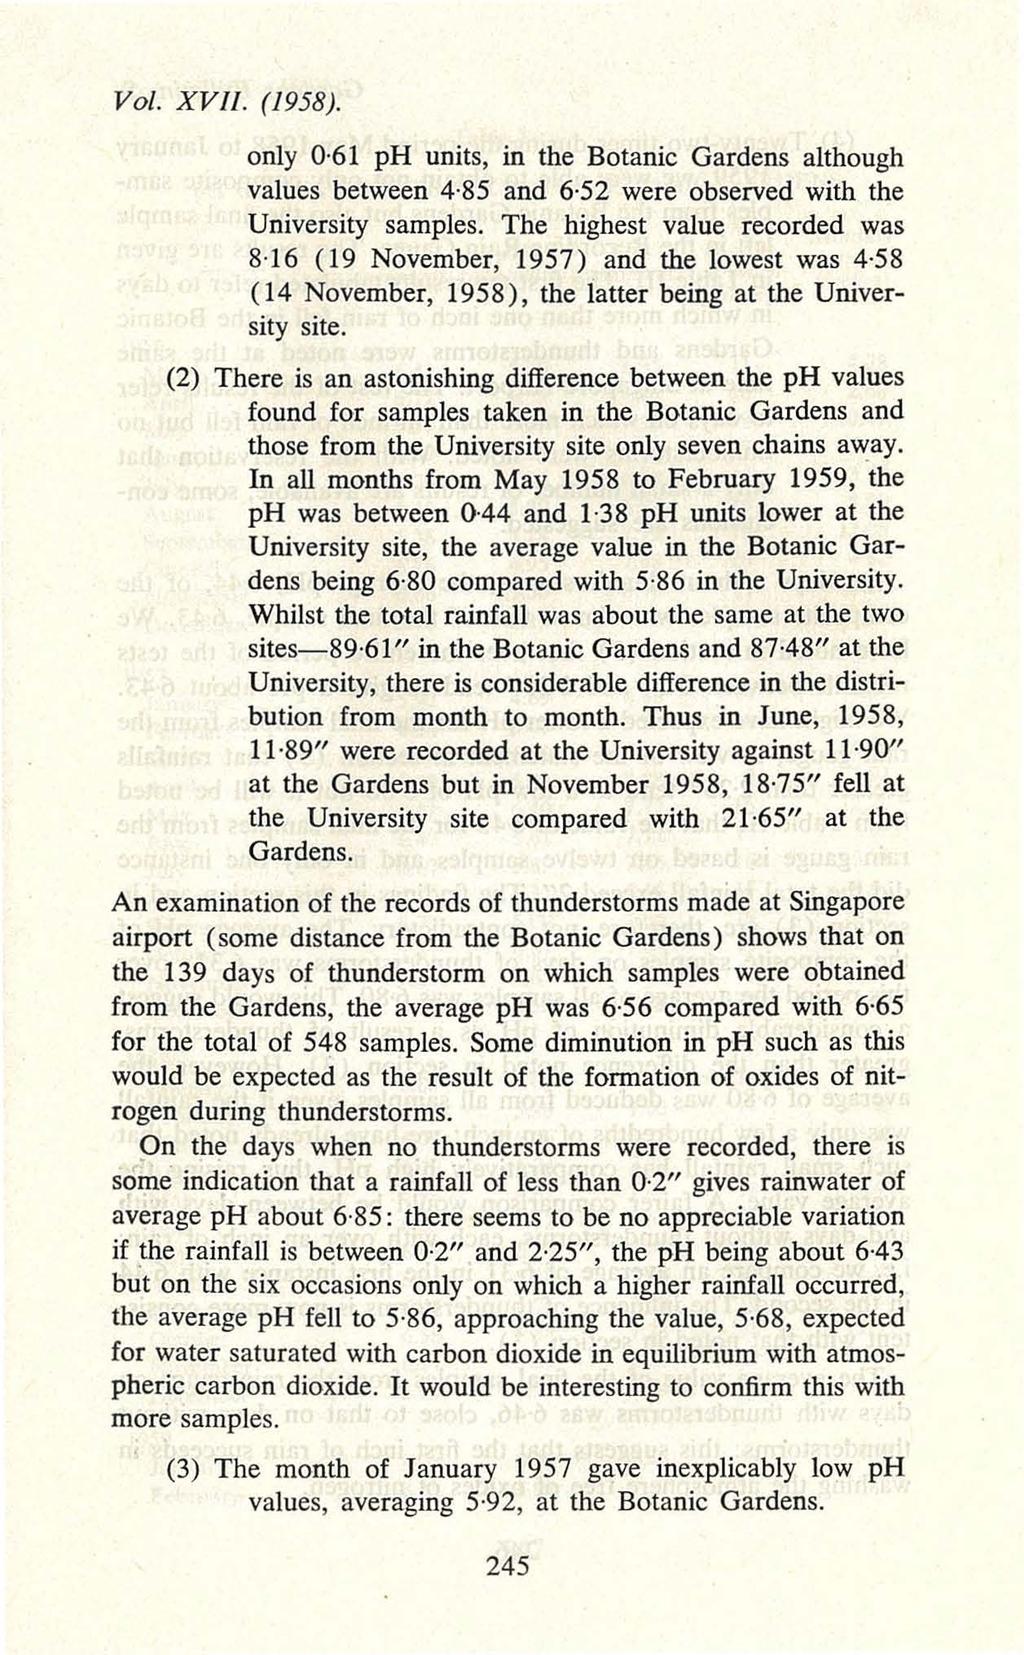 Vol. XVII. (1958). only 0 61 ph units, in the Botanic Gardens although values between 4 85 and 6 52 were observed with the University samples.